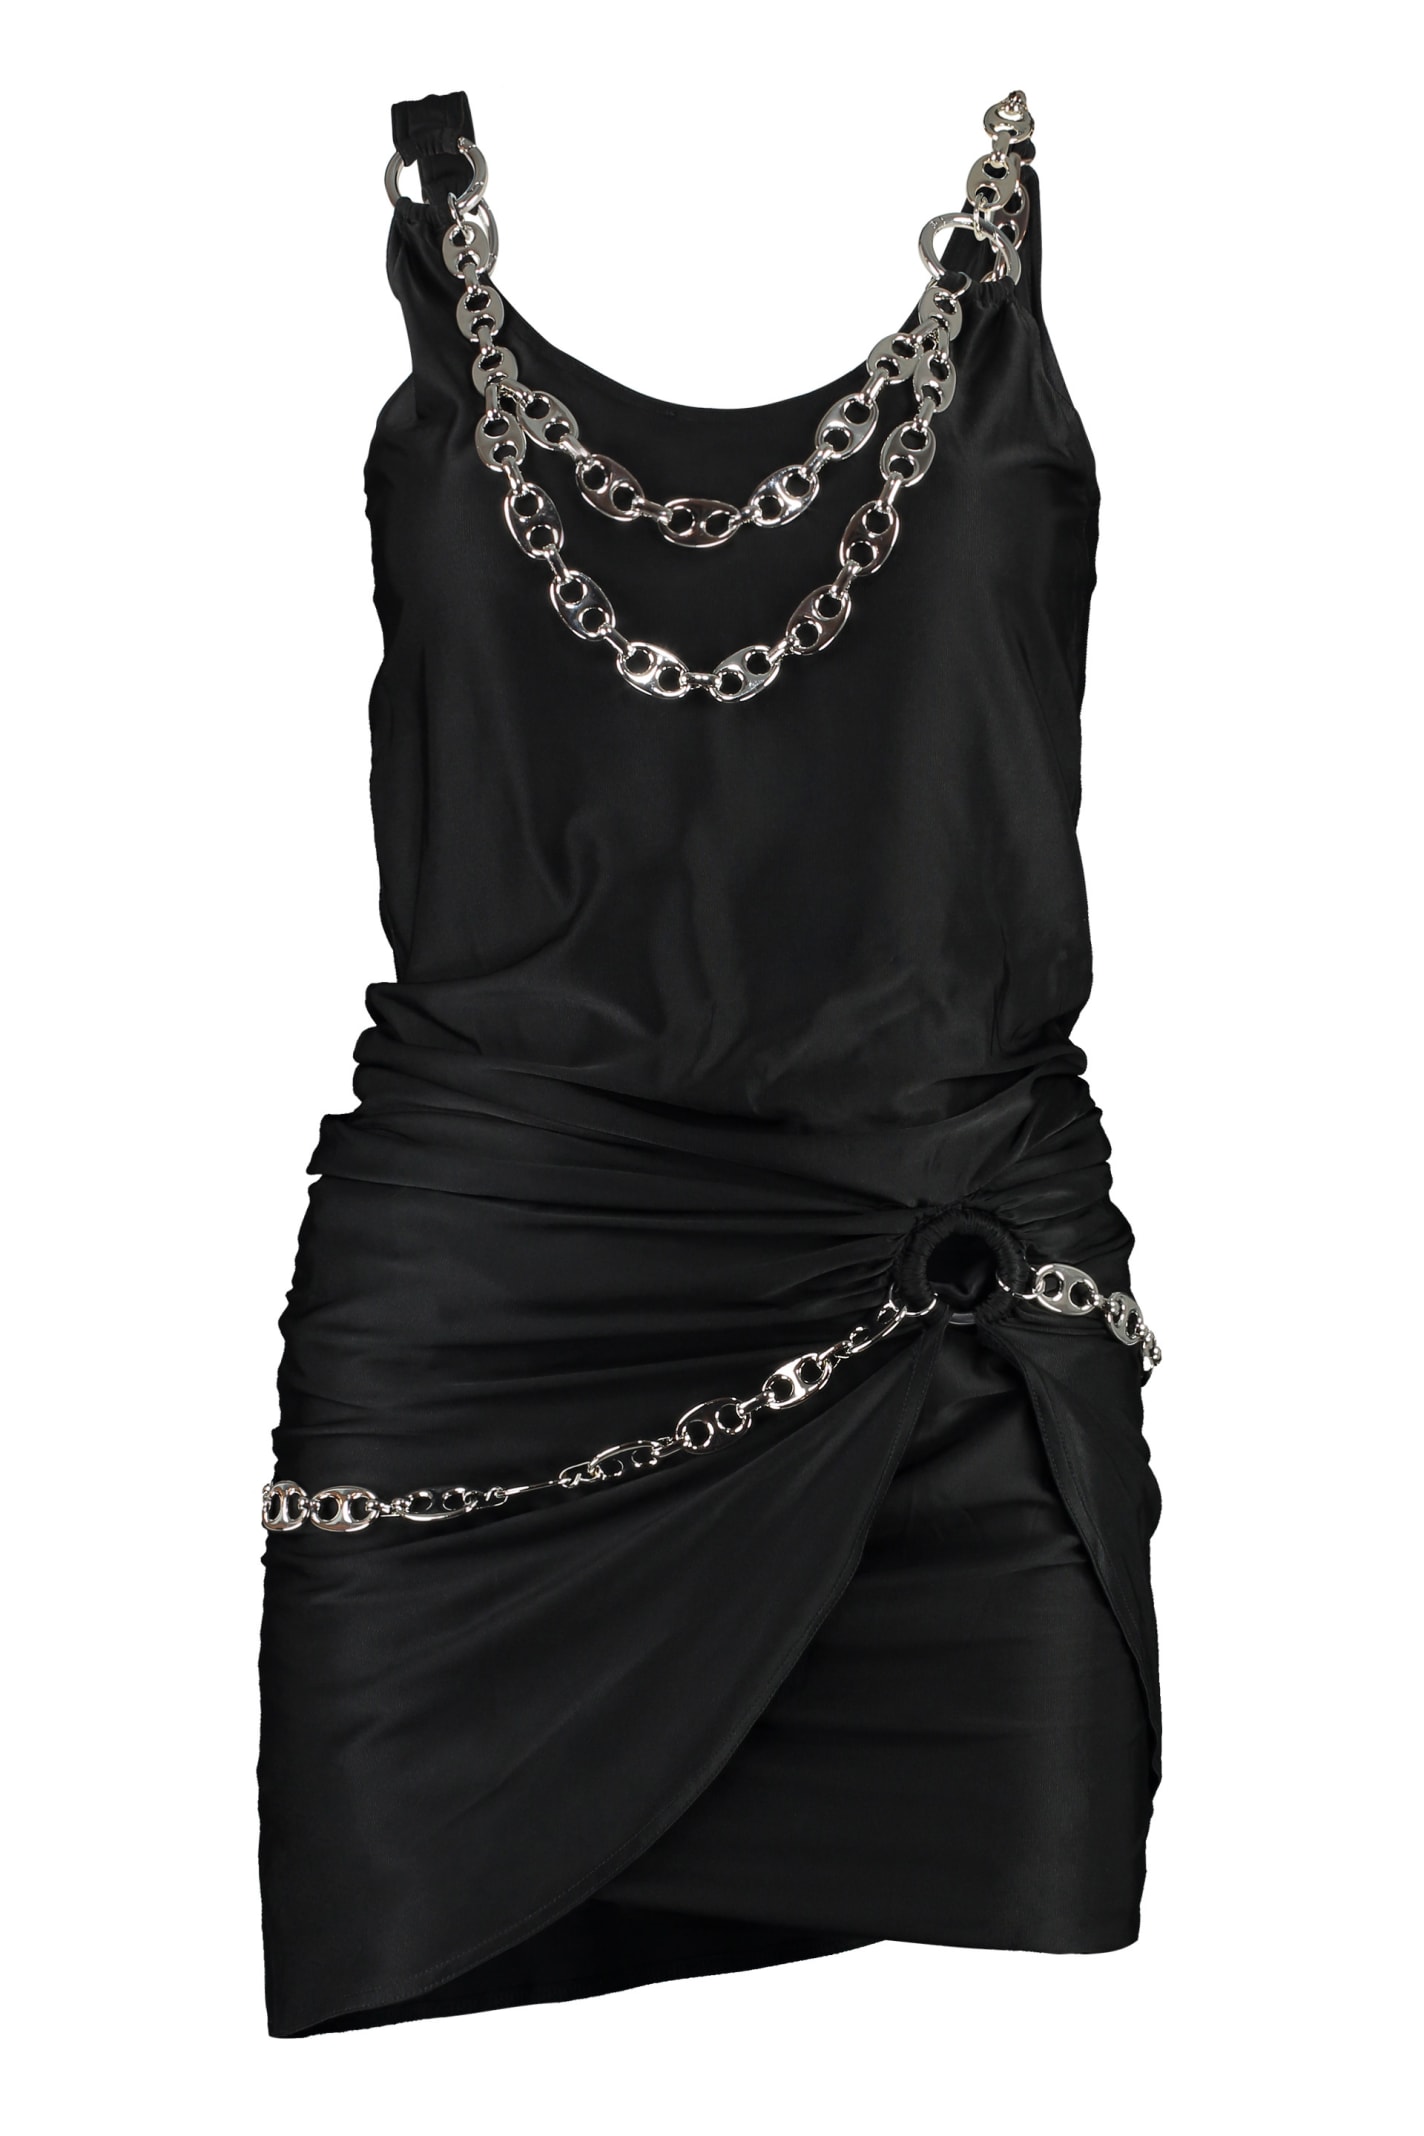 Paco Rabanne Dress With Chains